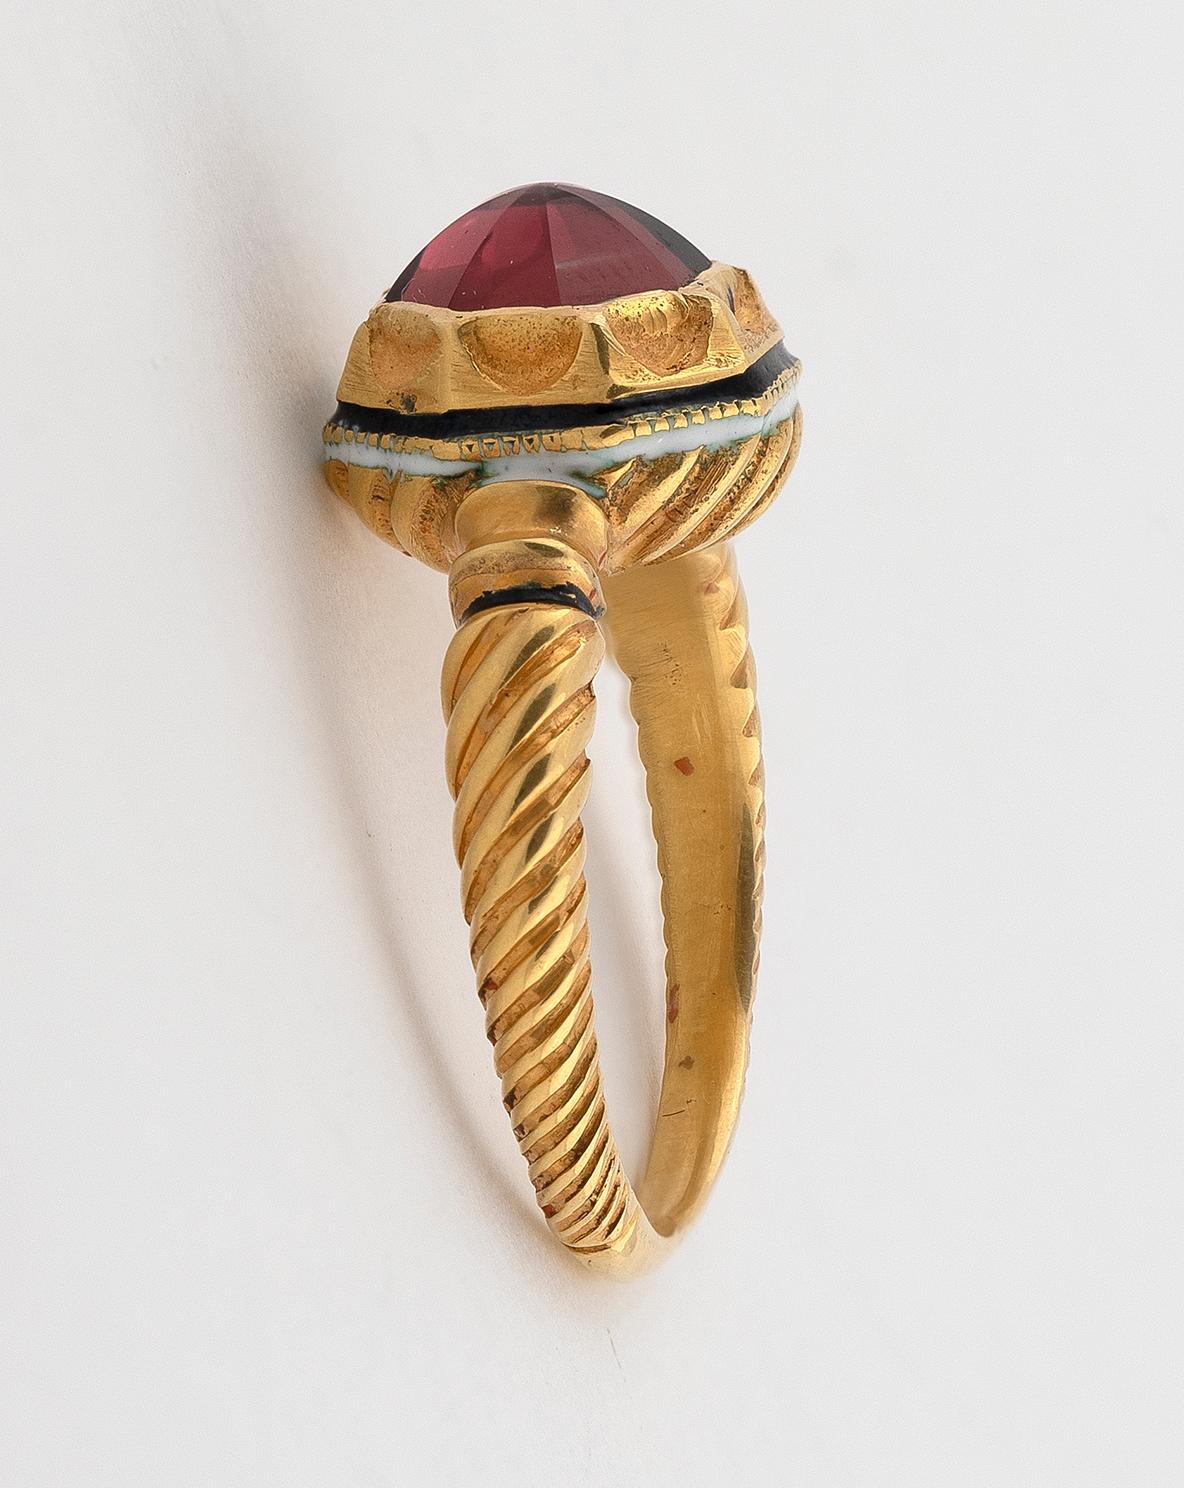 Cabochon red tourmaline in an elaborate high collet setting, between fluted shoulders, both with enamel decoration, ring size 7